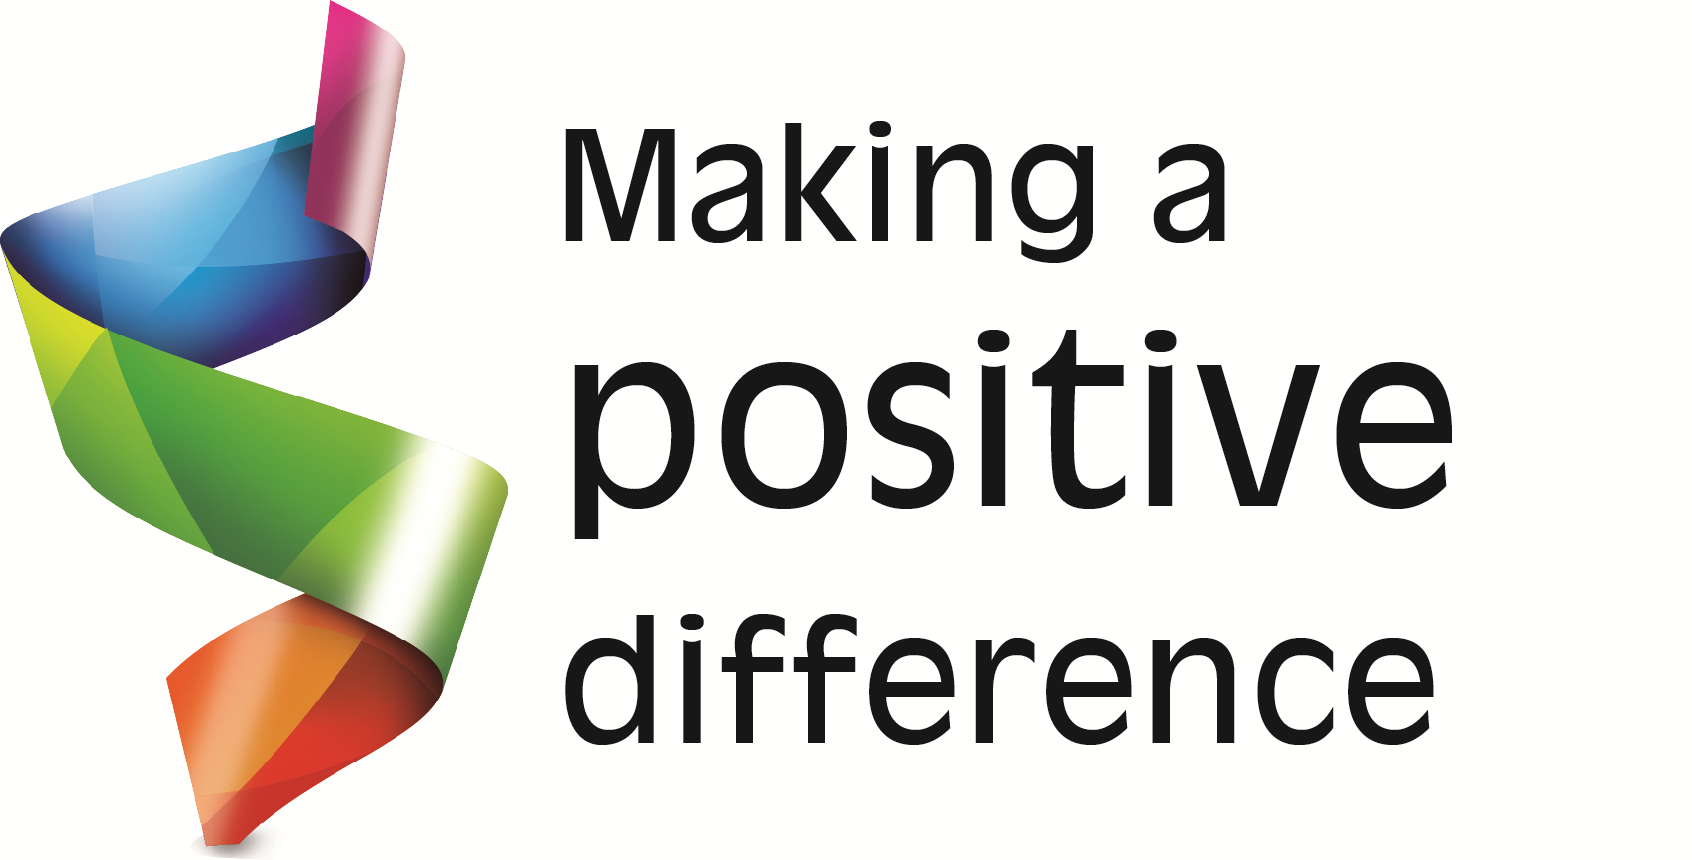 Making a Positive Difference